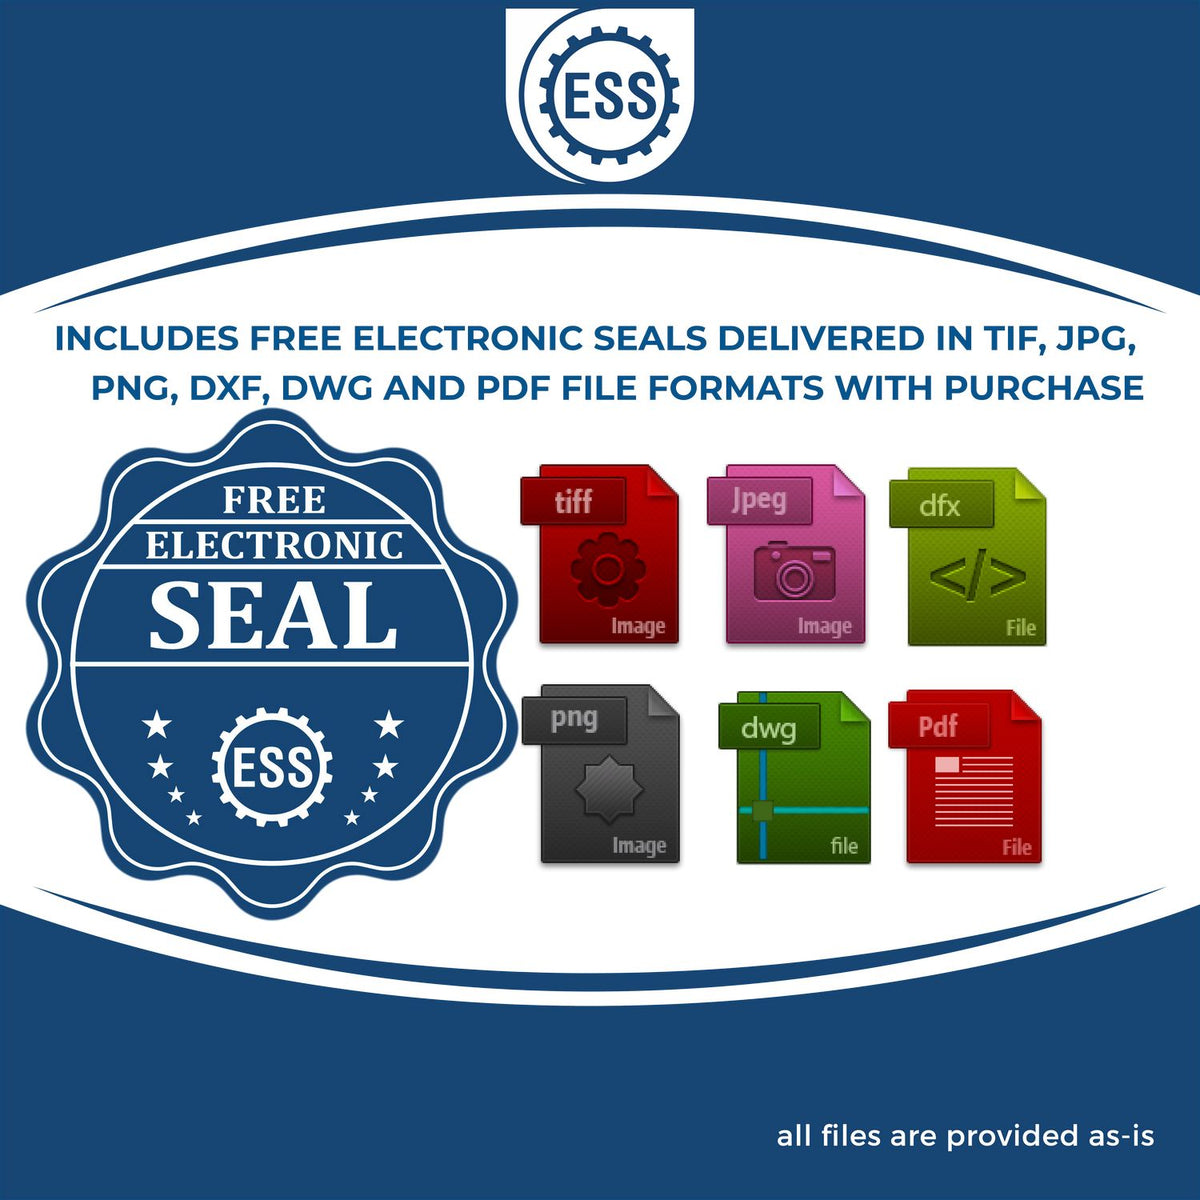 An infographic for the free electronic seal for the State of Missouri Architectural Seal Embosser illustrating the different file type icons such as DXF, DWG, TIF, JPG and PNG.